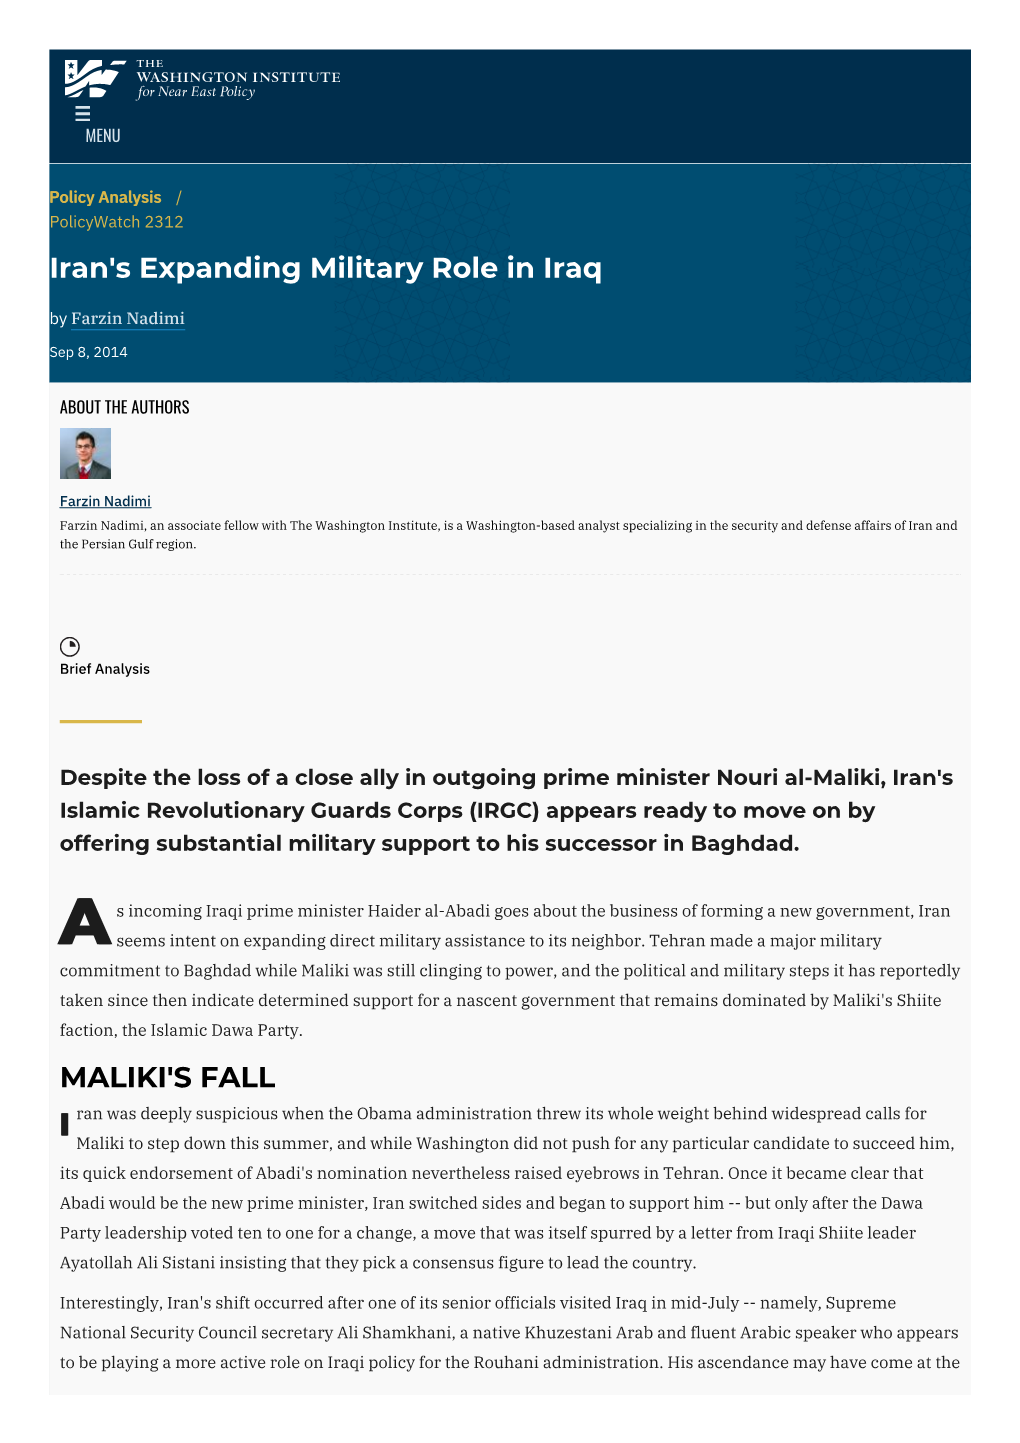 Iran's Expanding Military Role in Iraq | the Washington Institute